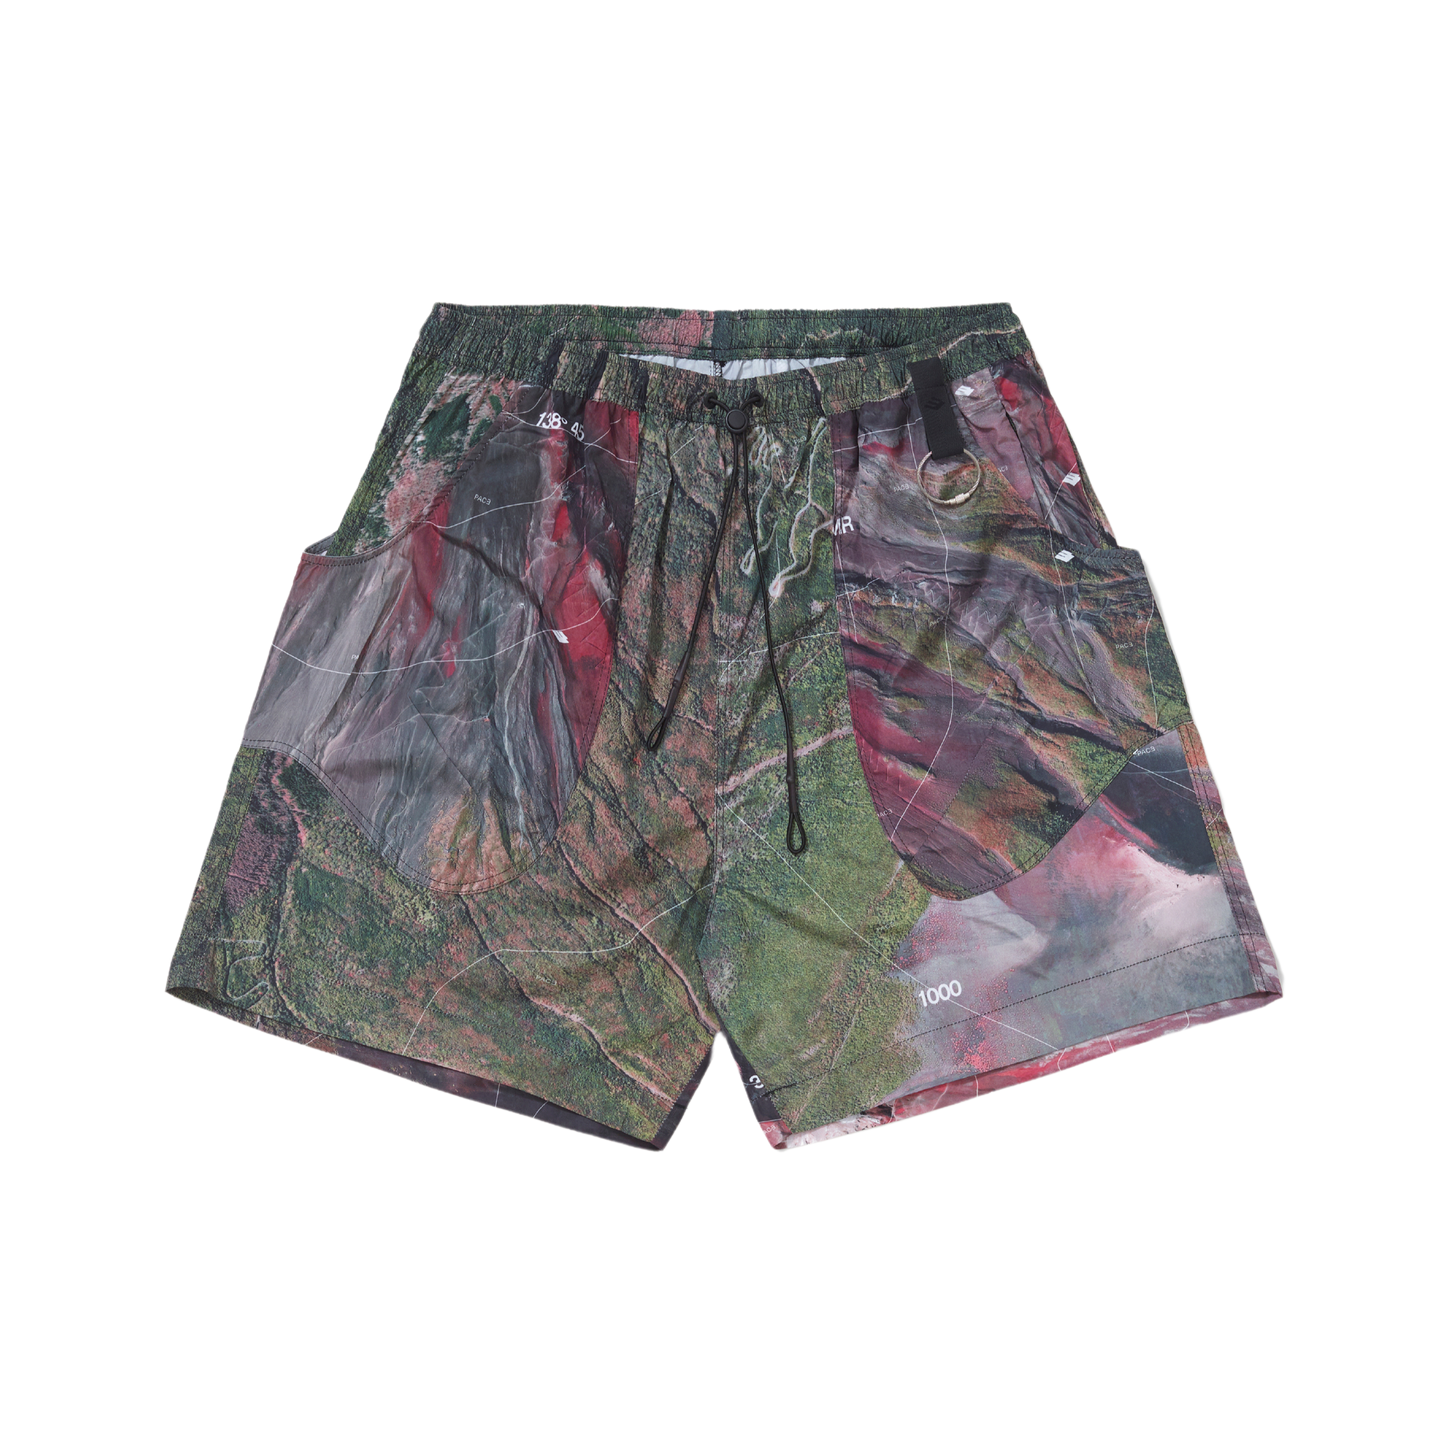 PACE - Tactical Shorts "Mount Fuji" - THE GAME